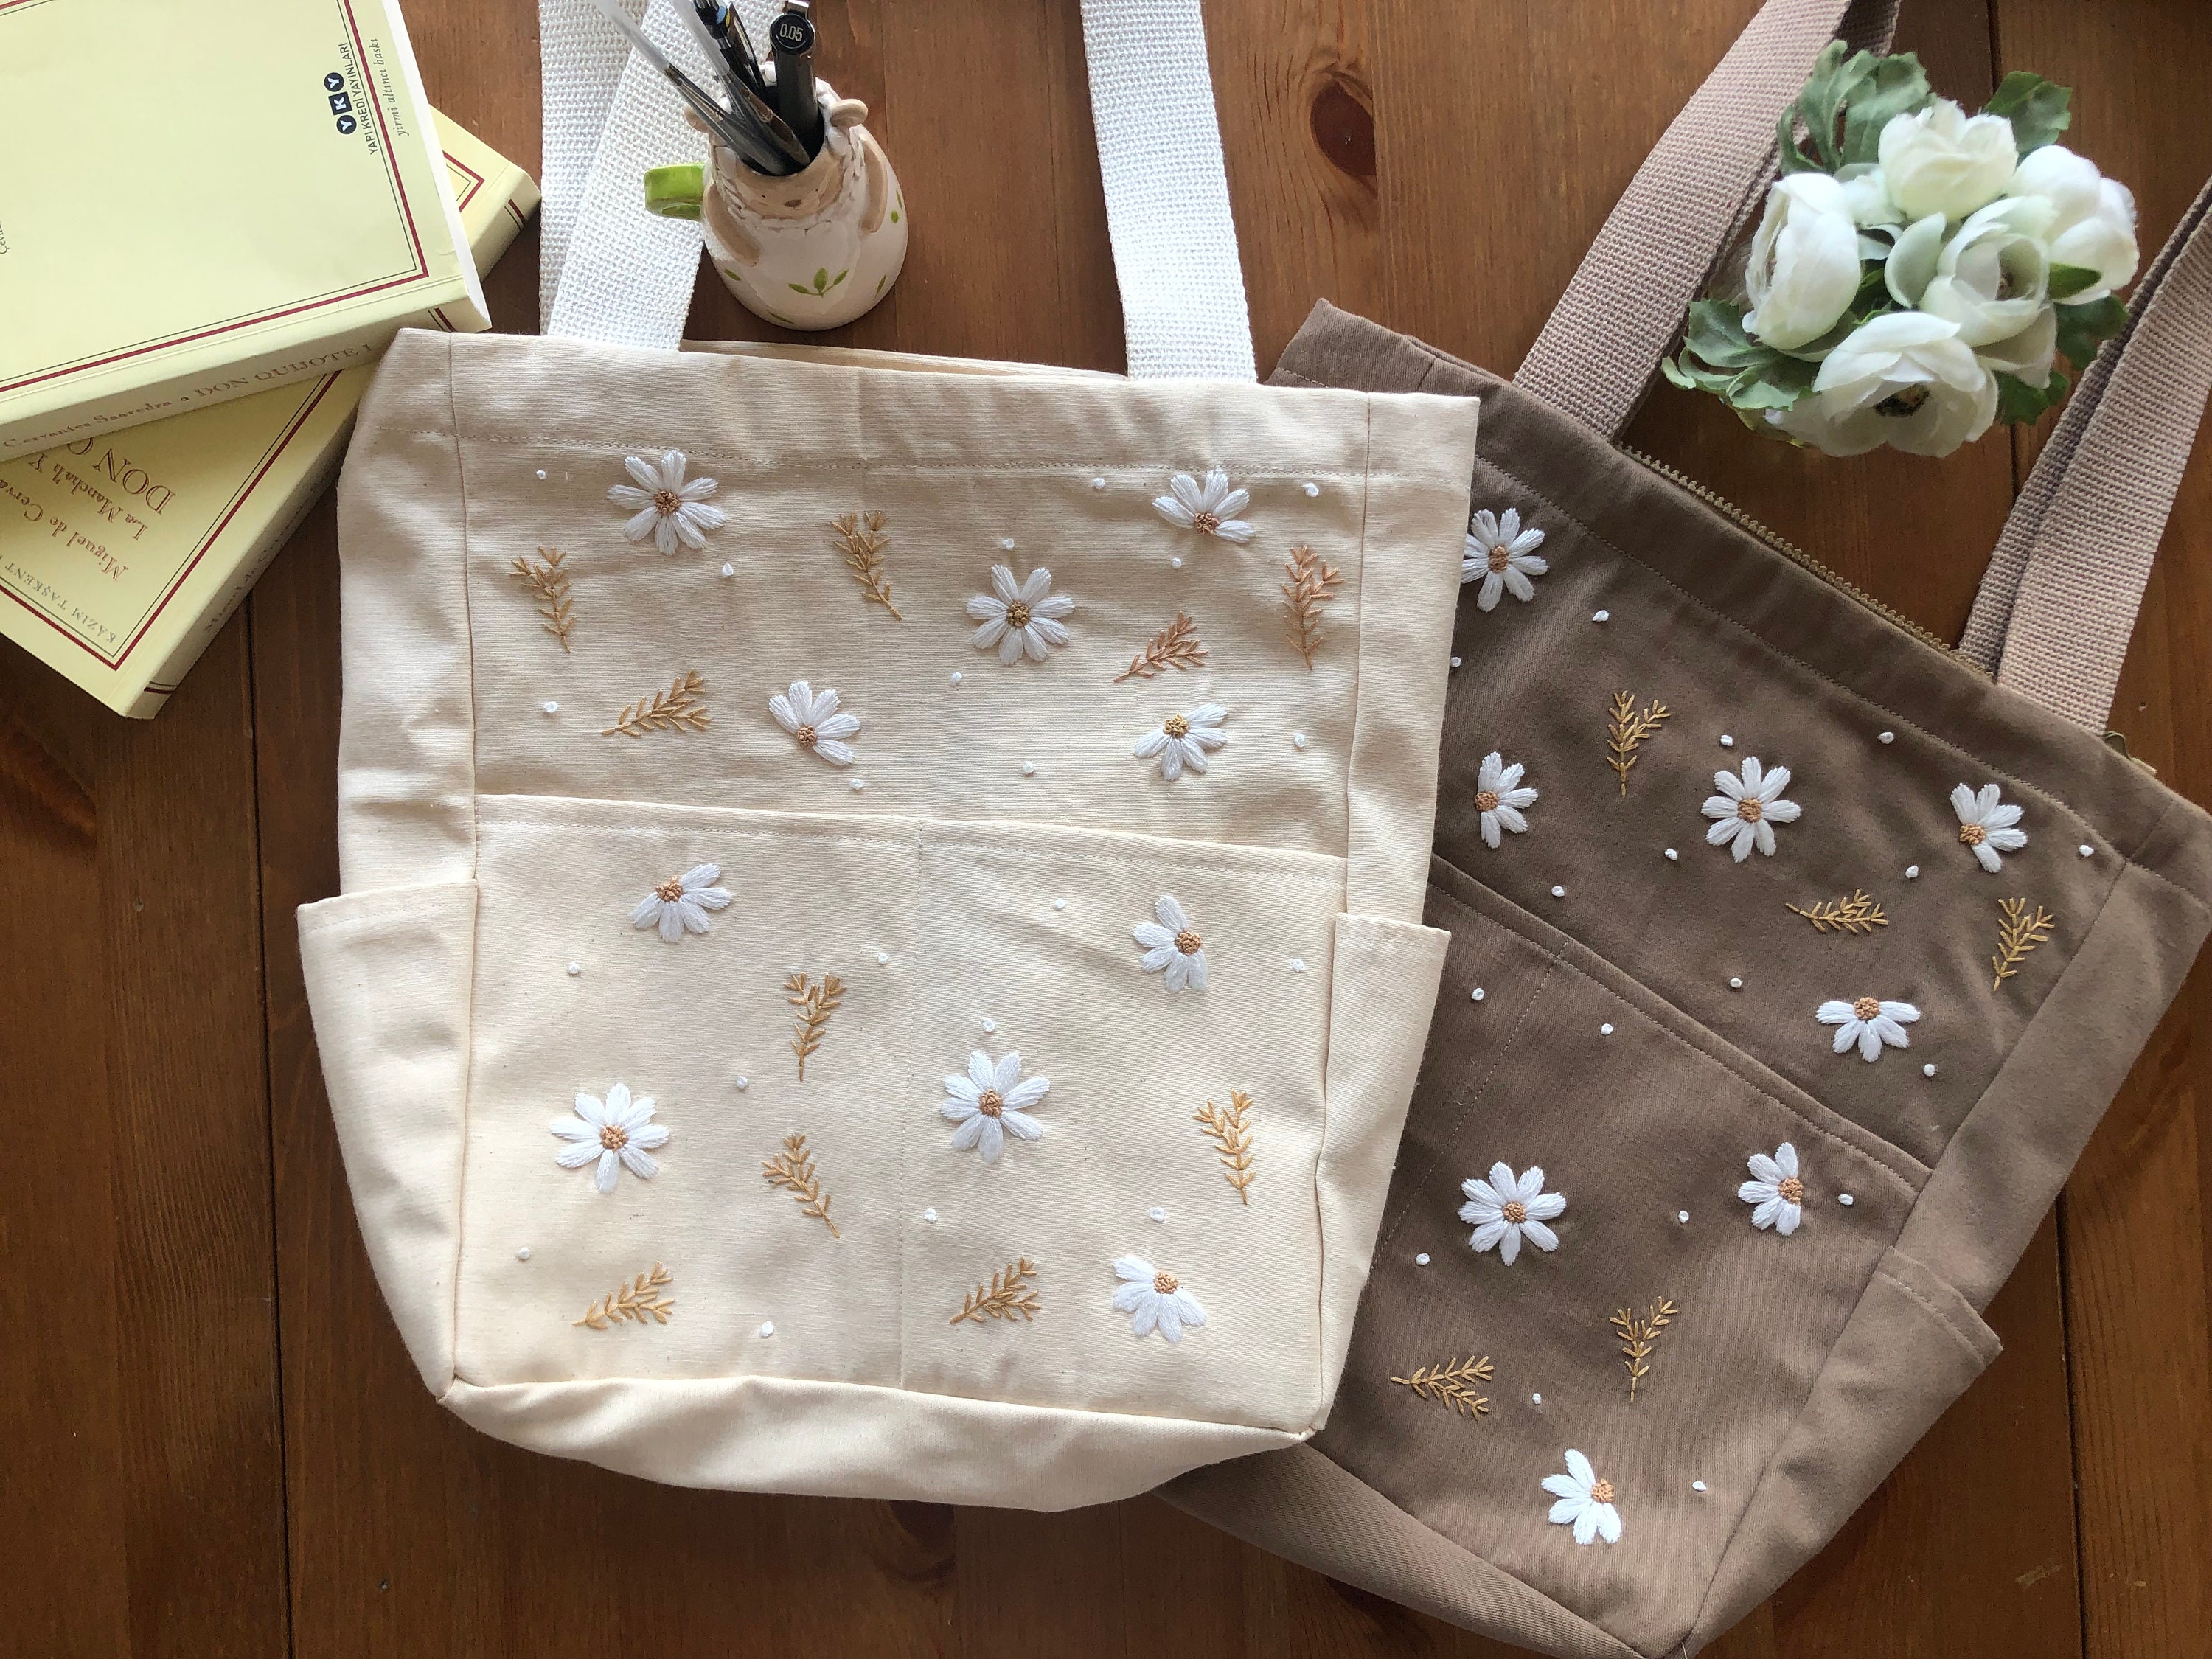 Daisy Embroidered Black Linen Tote Bag